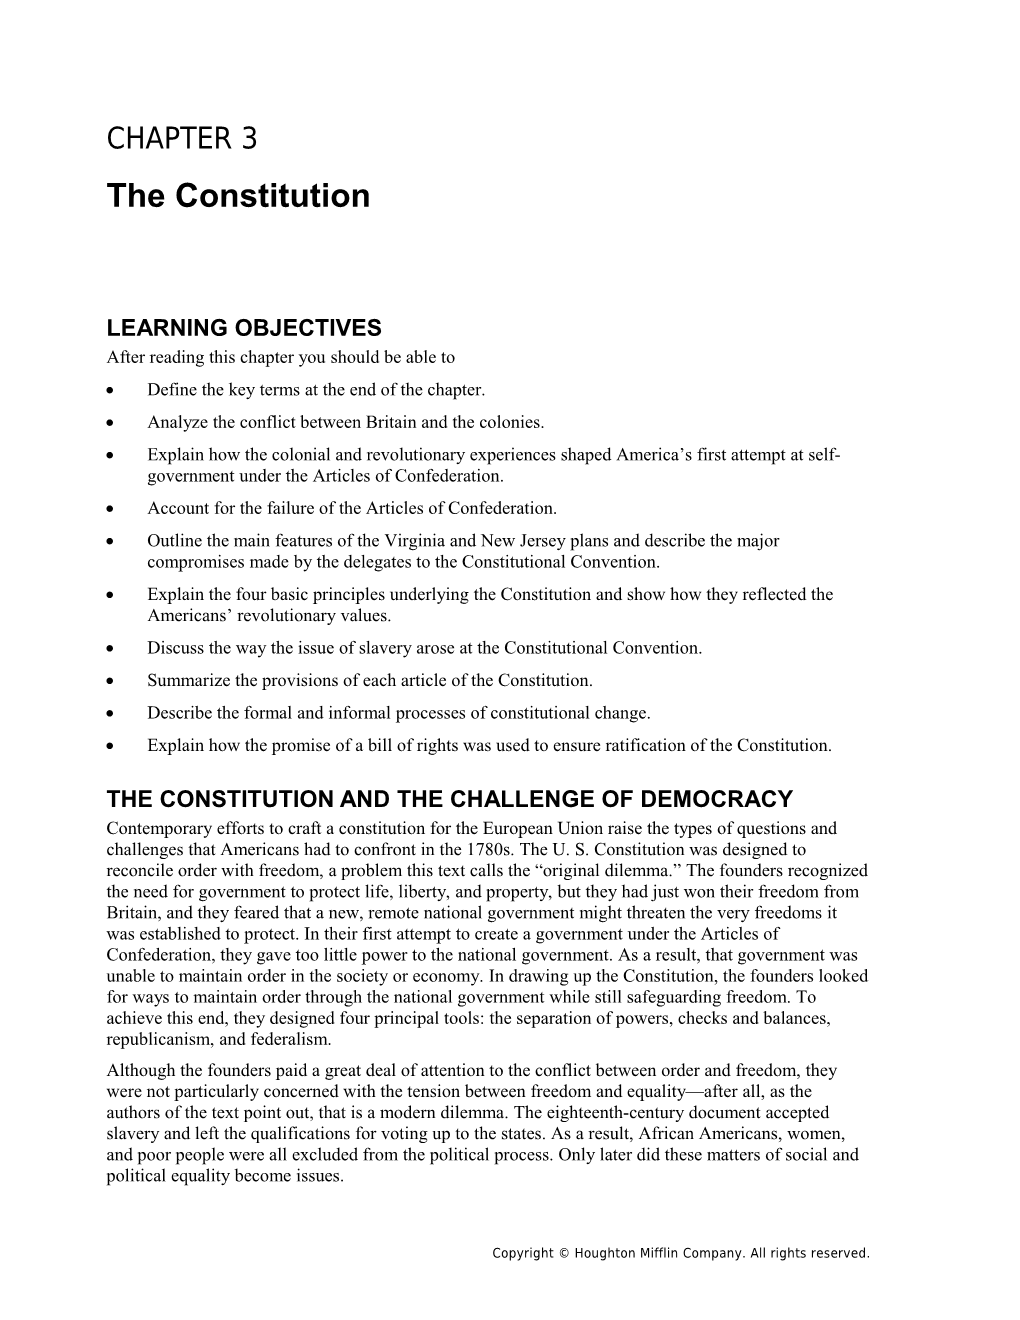 Chapter 3: the Constitution 1